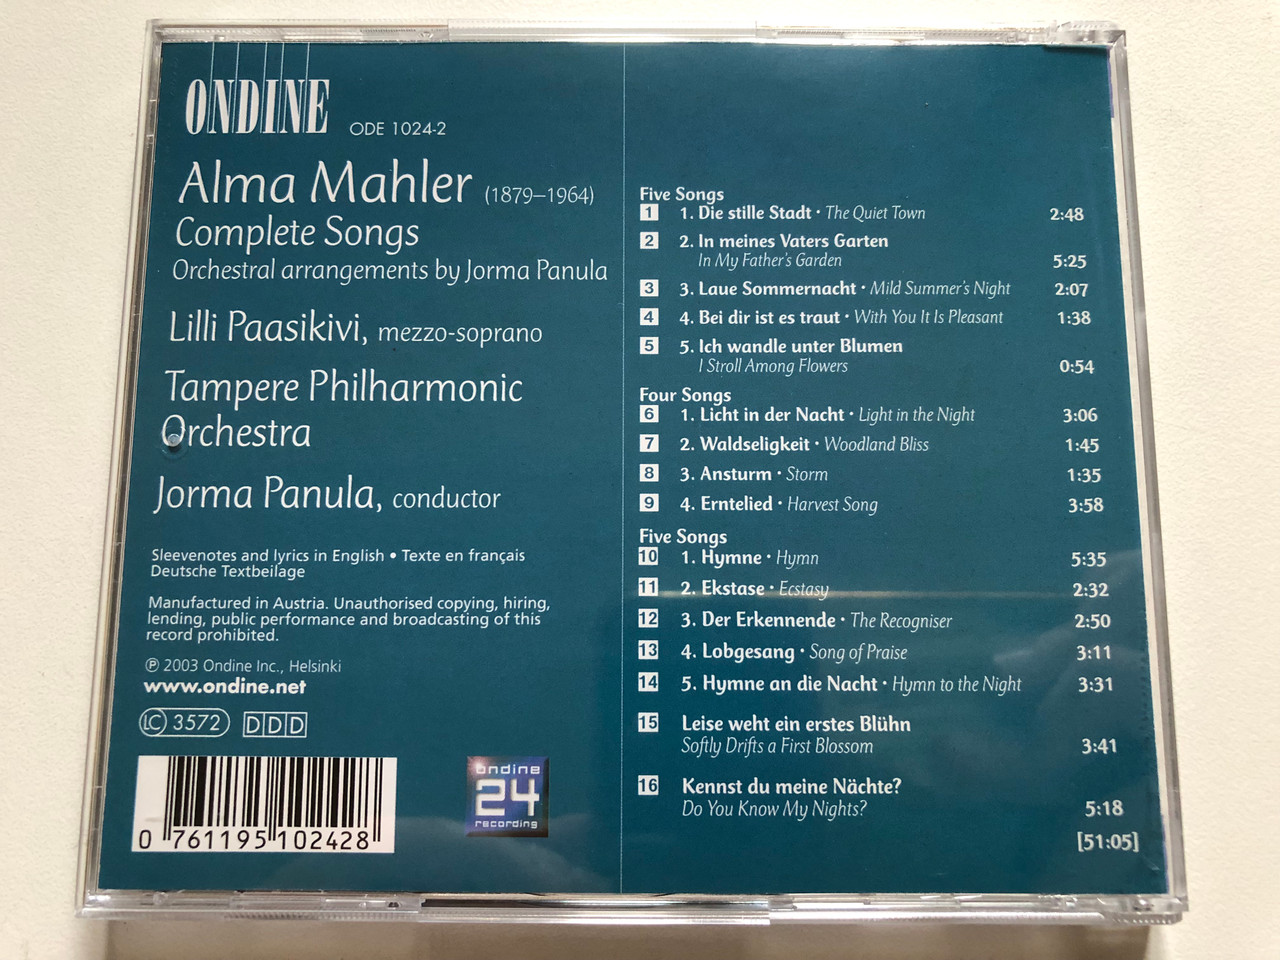 https://cdn10.bigcommerce.com/s-62bdpkt7pb/products/0/images/306818/Alma_Mahler_Complete_Songs_-_Lilli_Paasikivi_Tampere_Philharmonic_Orchestra_Jorma_Panula_Ondine_Audio_CD_2003_ODE_1024-2_2__77201.1698398985.1280.1280.JPG?c=2